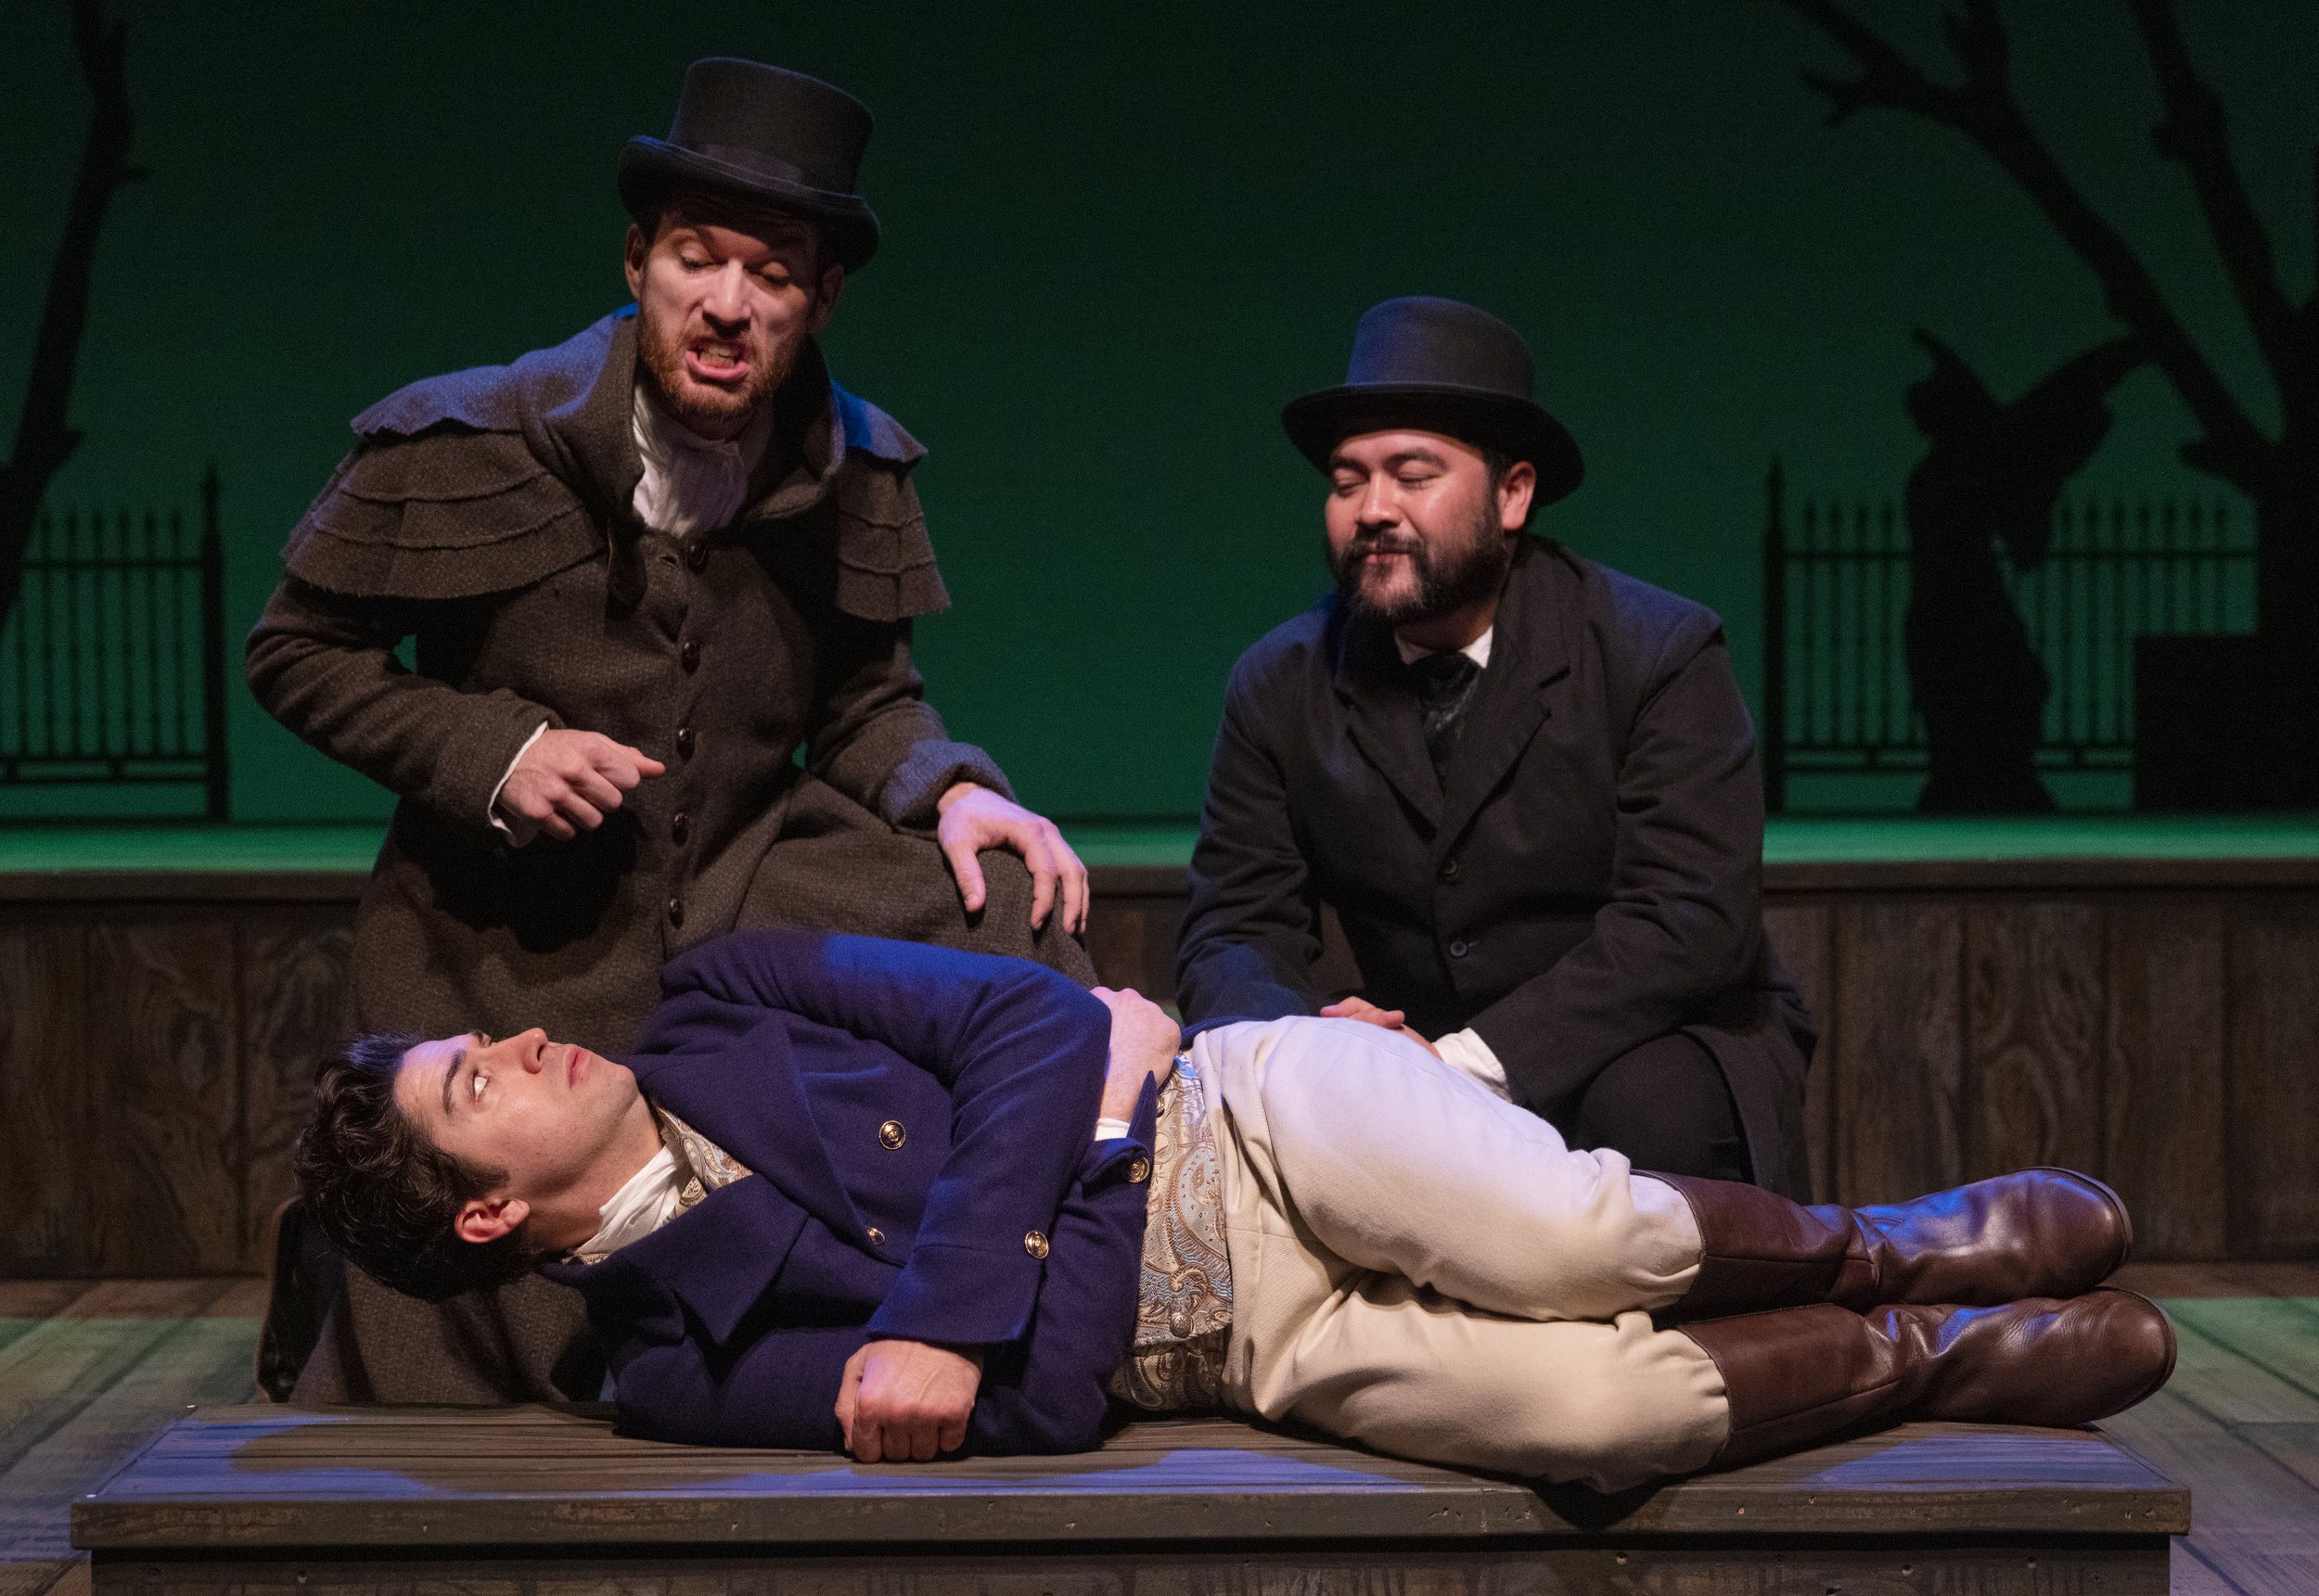 Hunter Hnat as Pip with Christopher Pankratz and Lucas Gonzales as Debt Collectors. Photo by Tim Fuller.